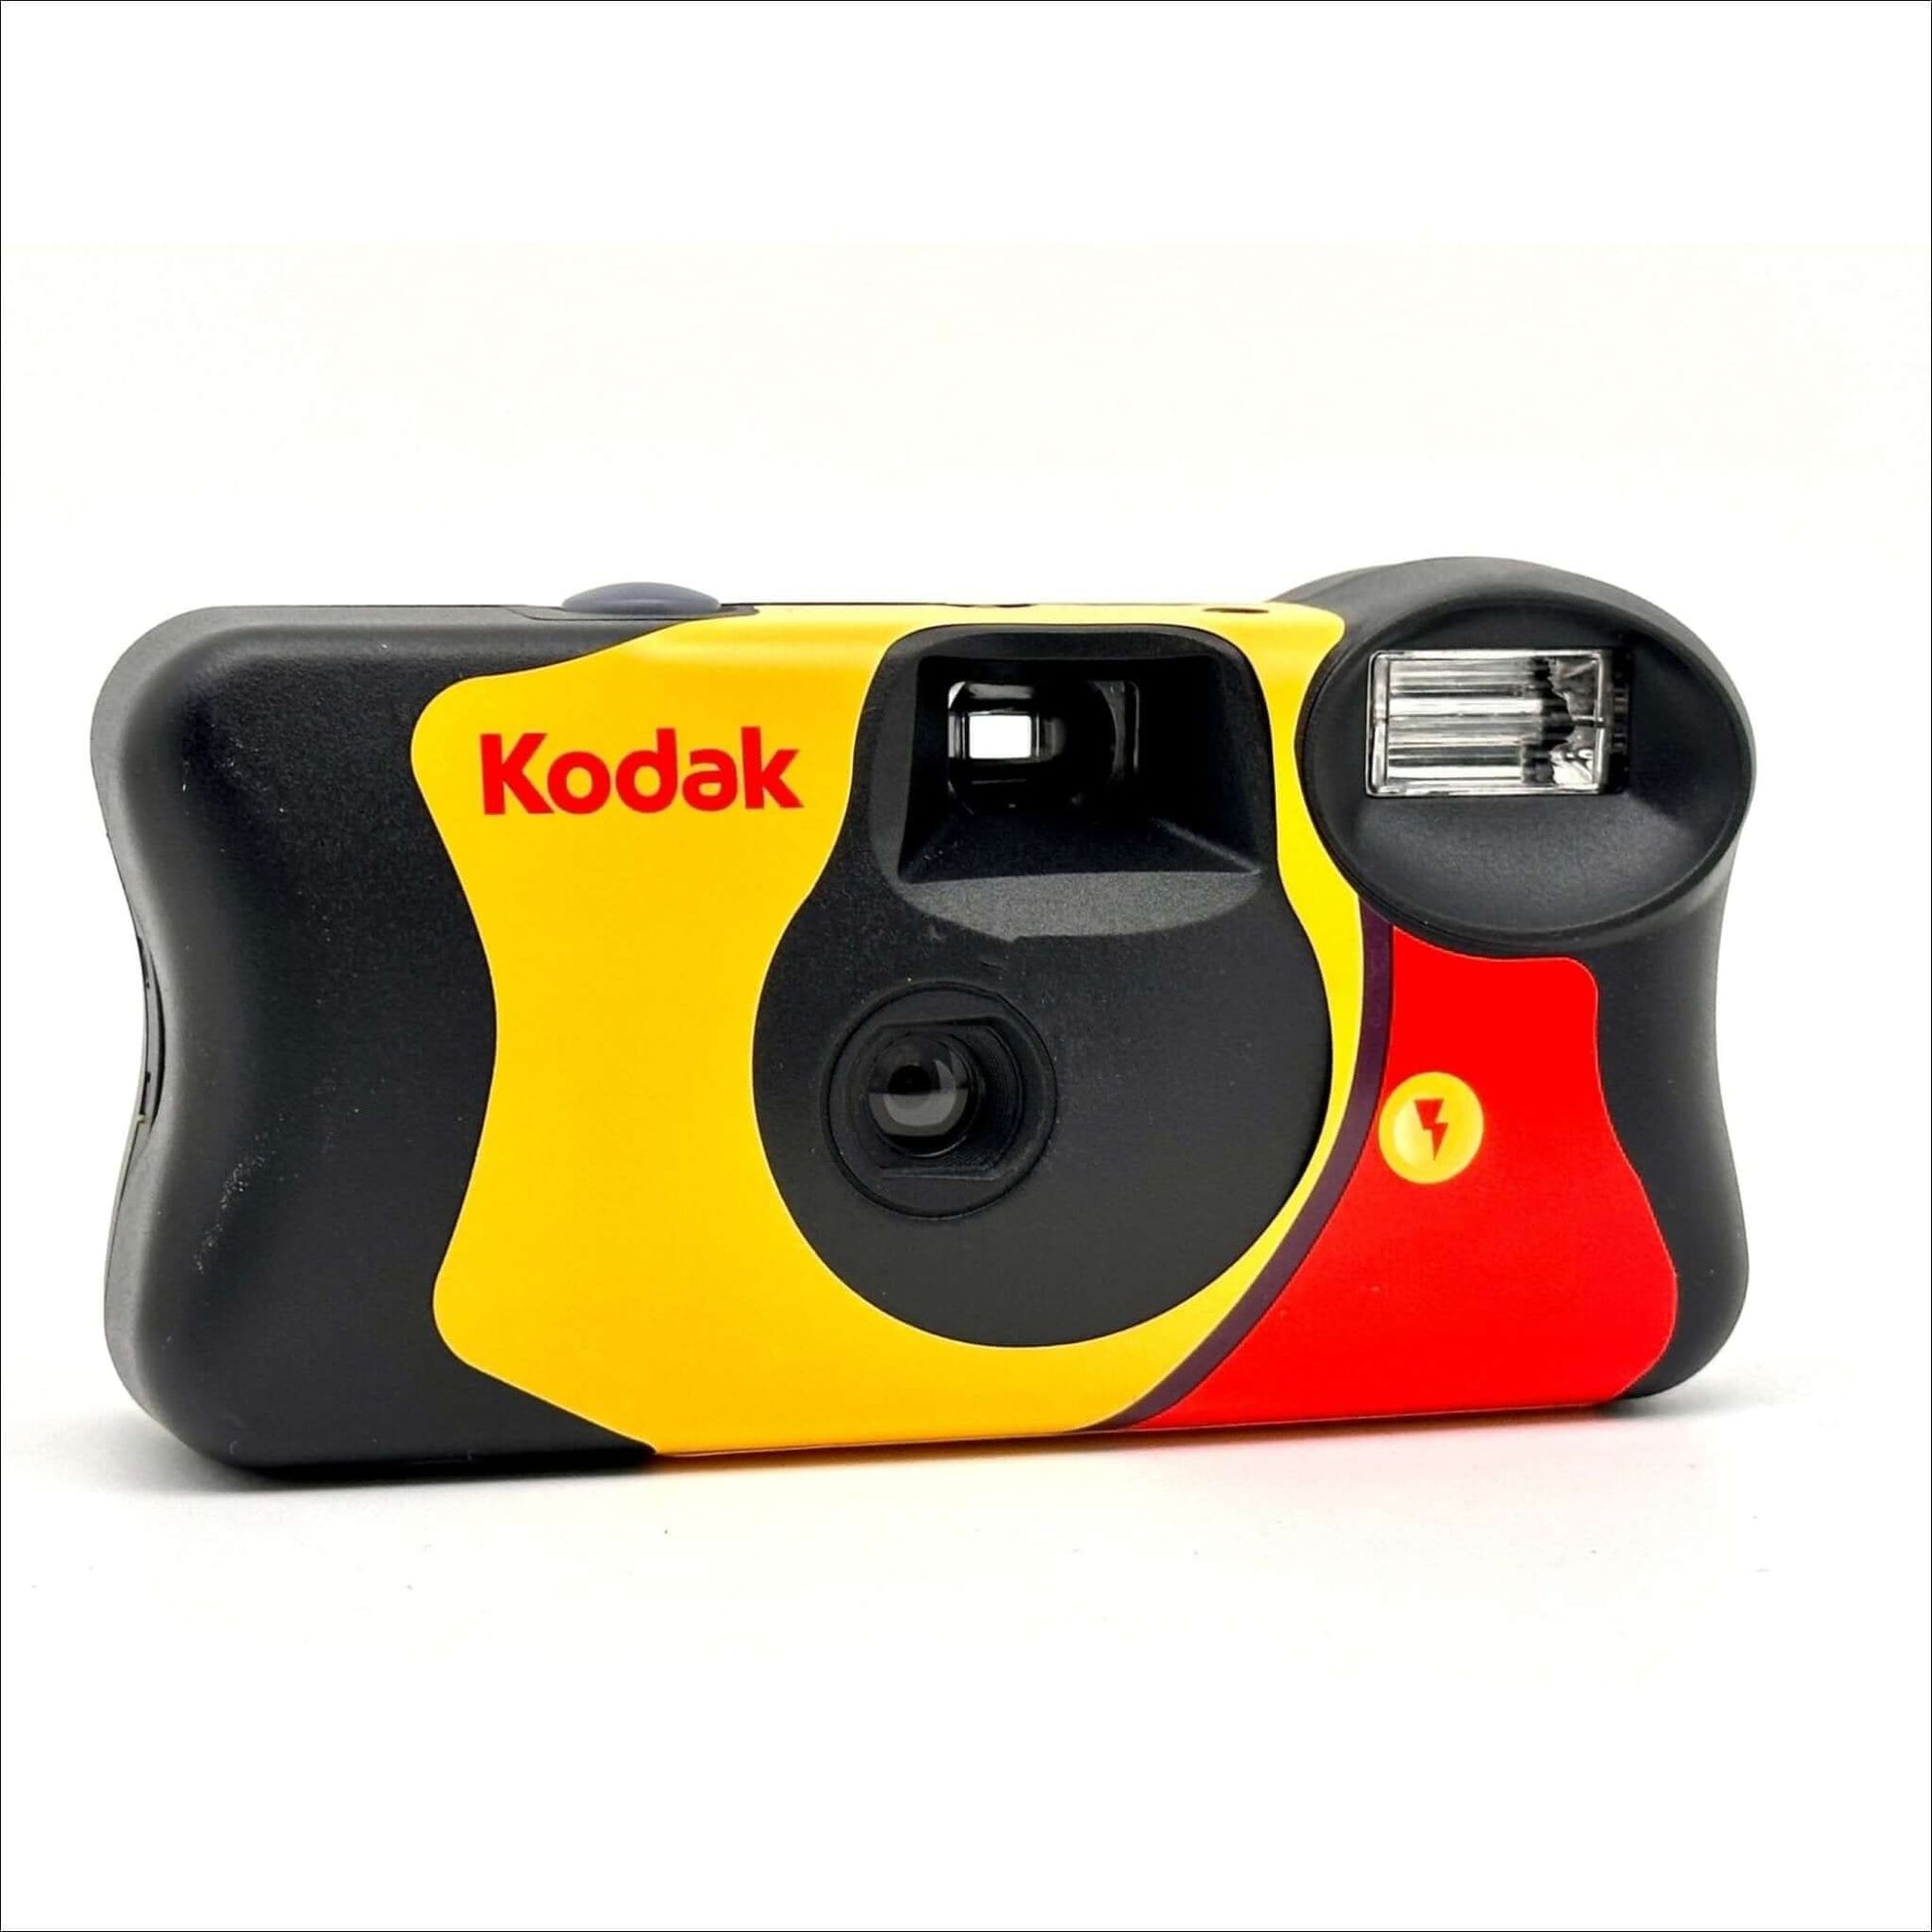 Kodak Funsaver 35mm One-Time-Use Disposable Camera (ISO-800, 27 Exp.) –  Film Supply Club